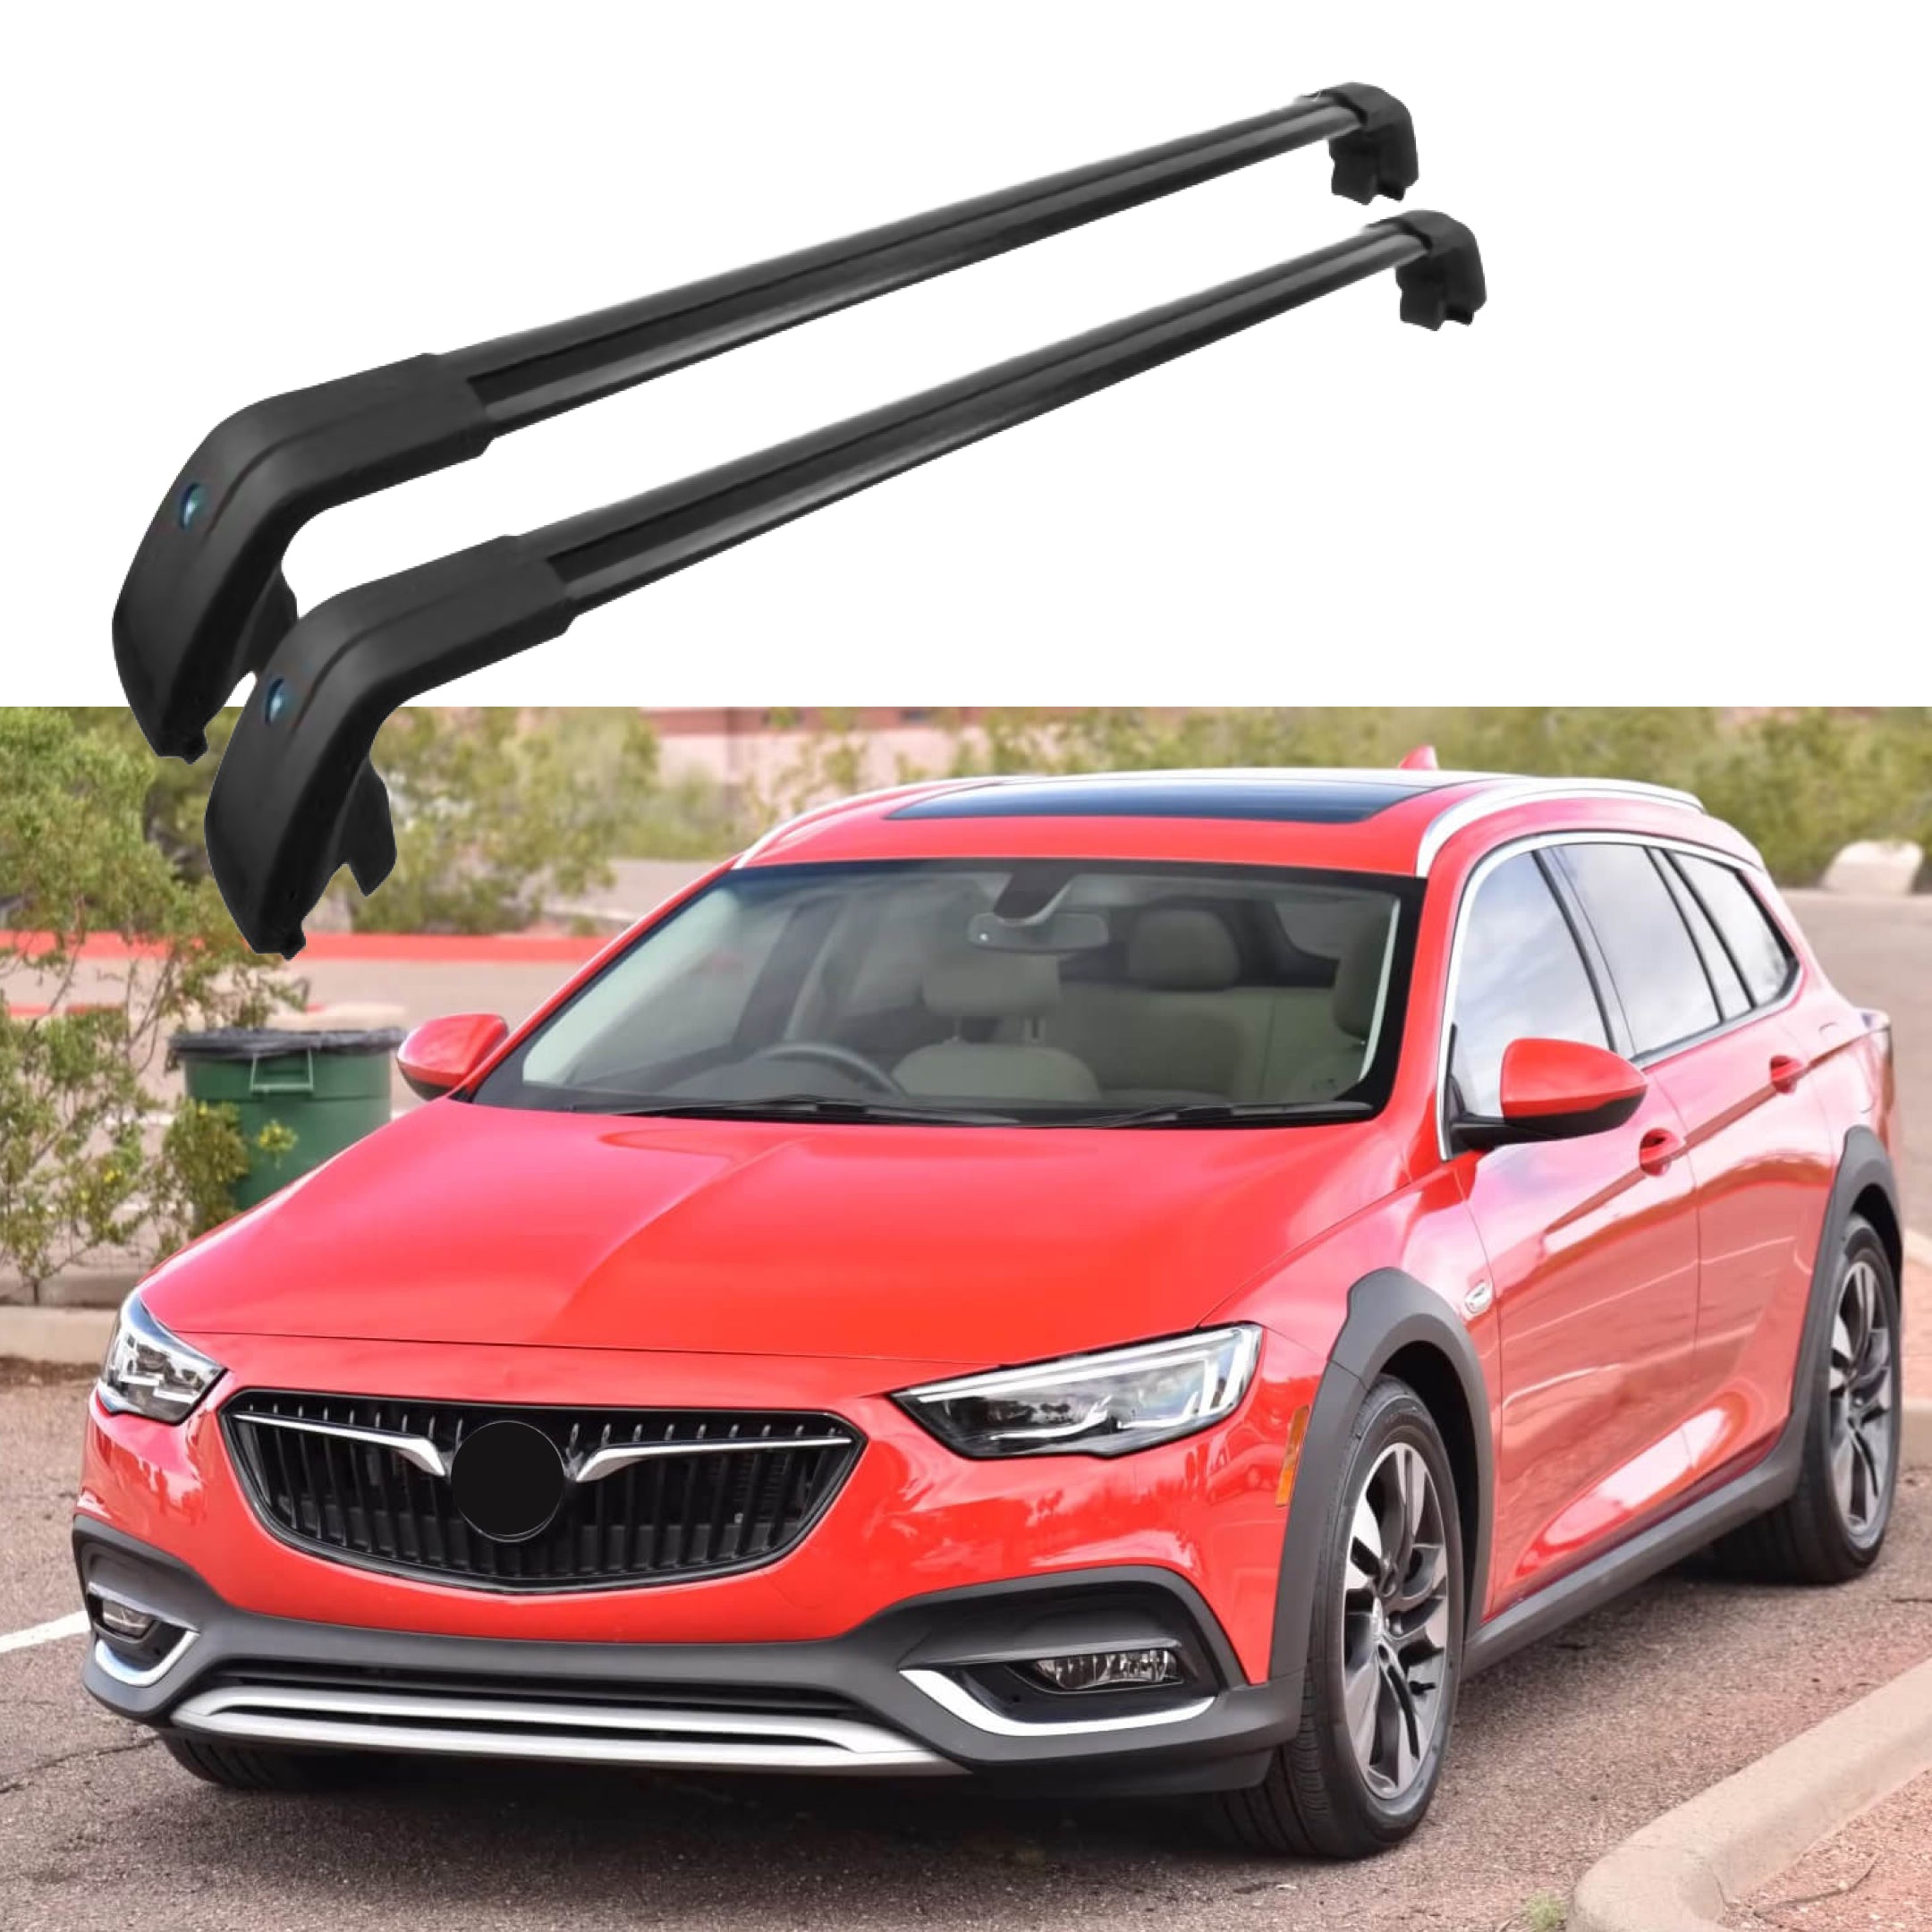 OMAC Roof Rack Cross Bars Buick Regal TourX 2018 to 2021, Silver, Car  Rooftop Rail Cross Bar 165 Pounds, 2 Pieces